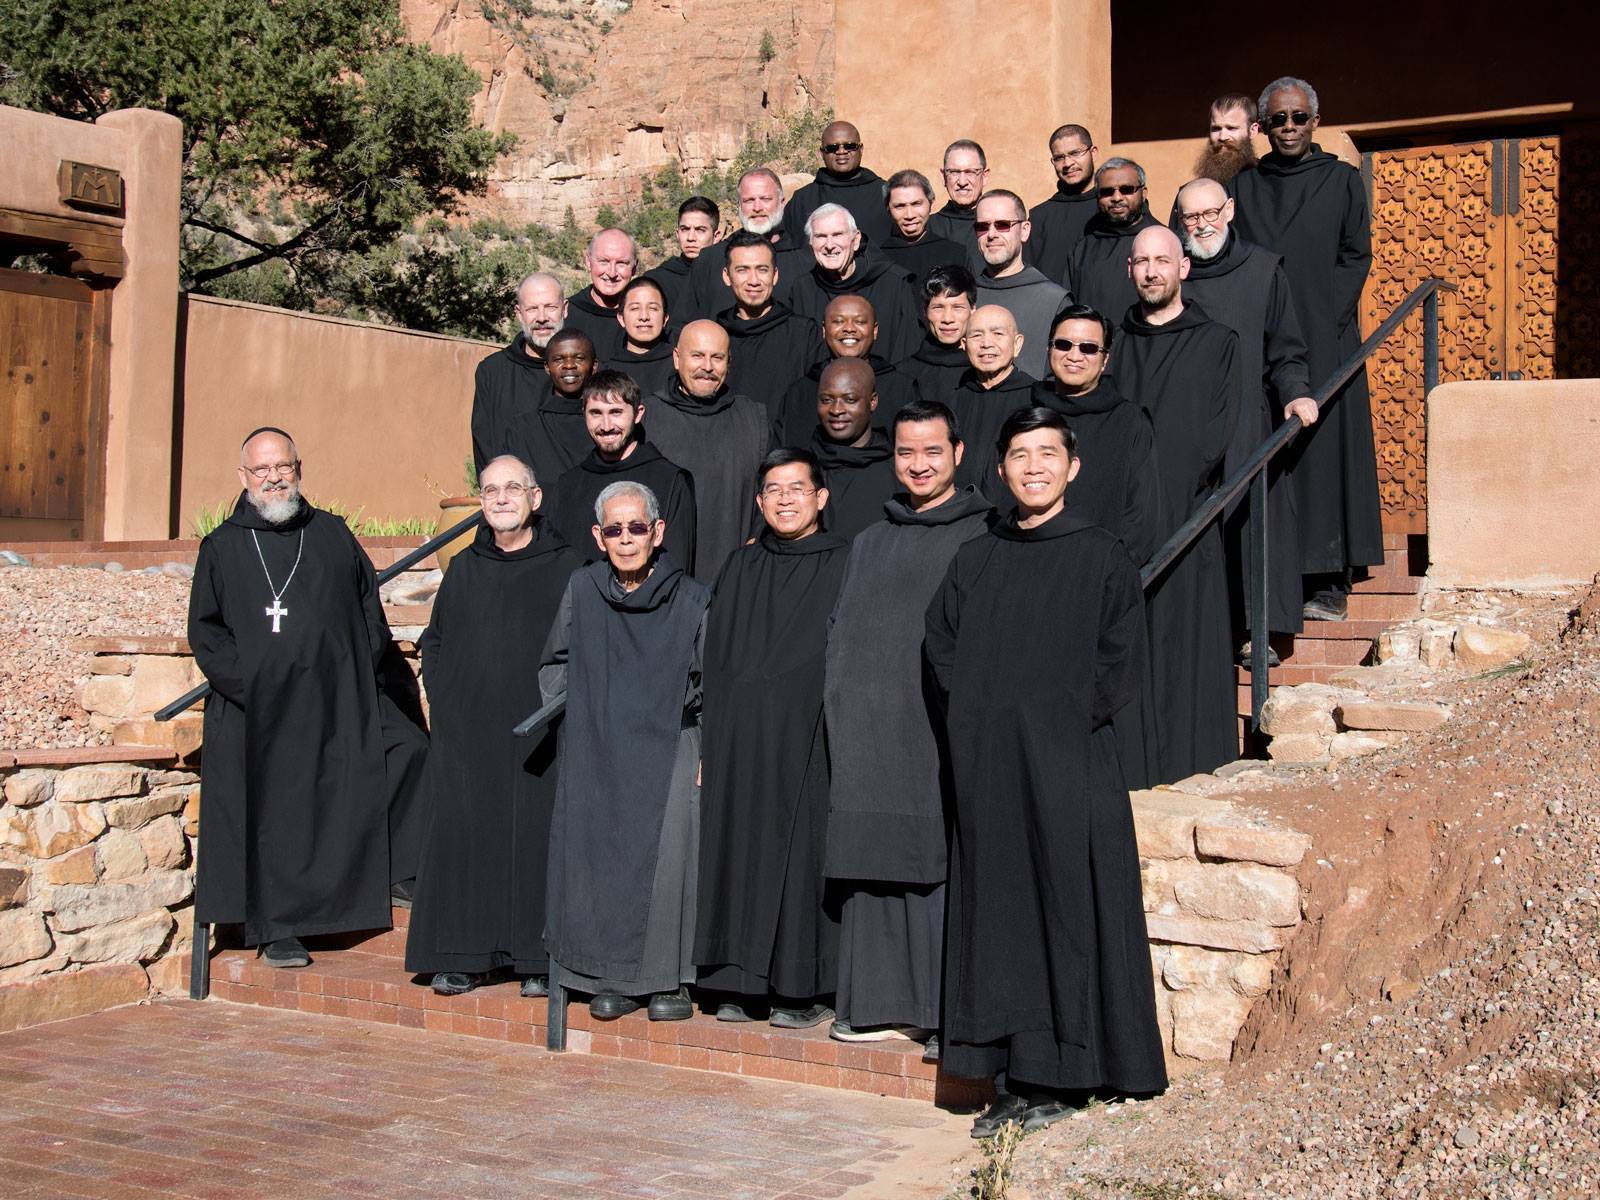 web-monastery-of-christ-in-the-desert-brothers-benedictine-monastery-of-christ-in-the-desert-facebook